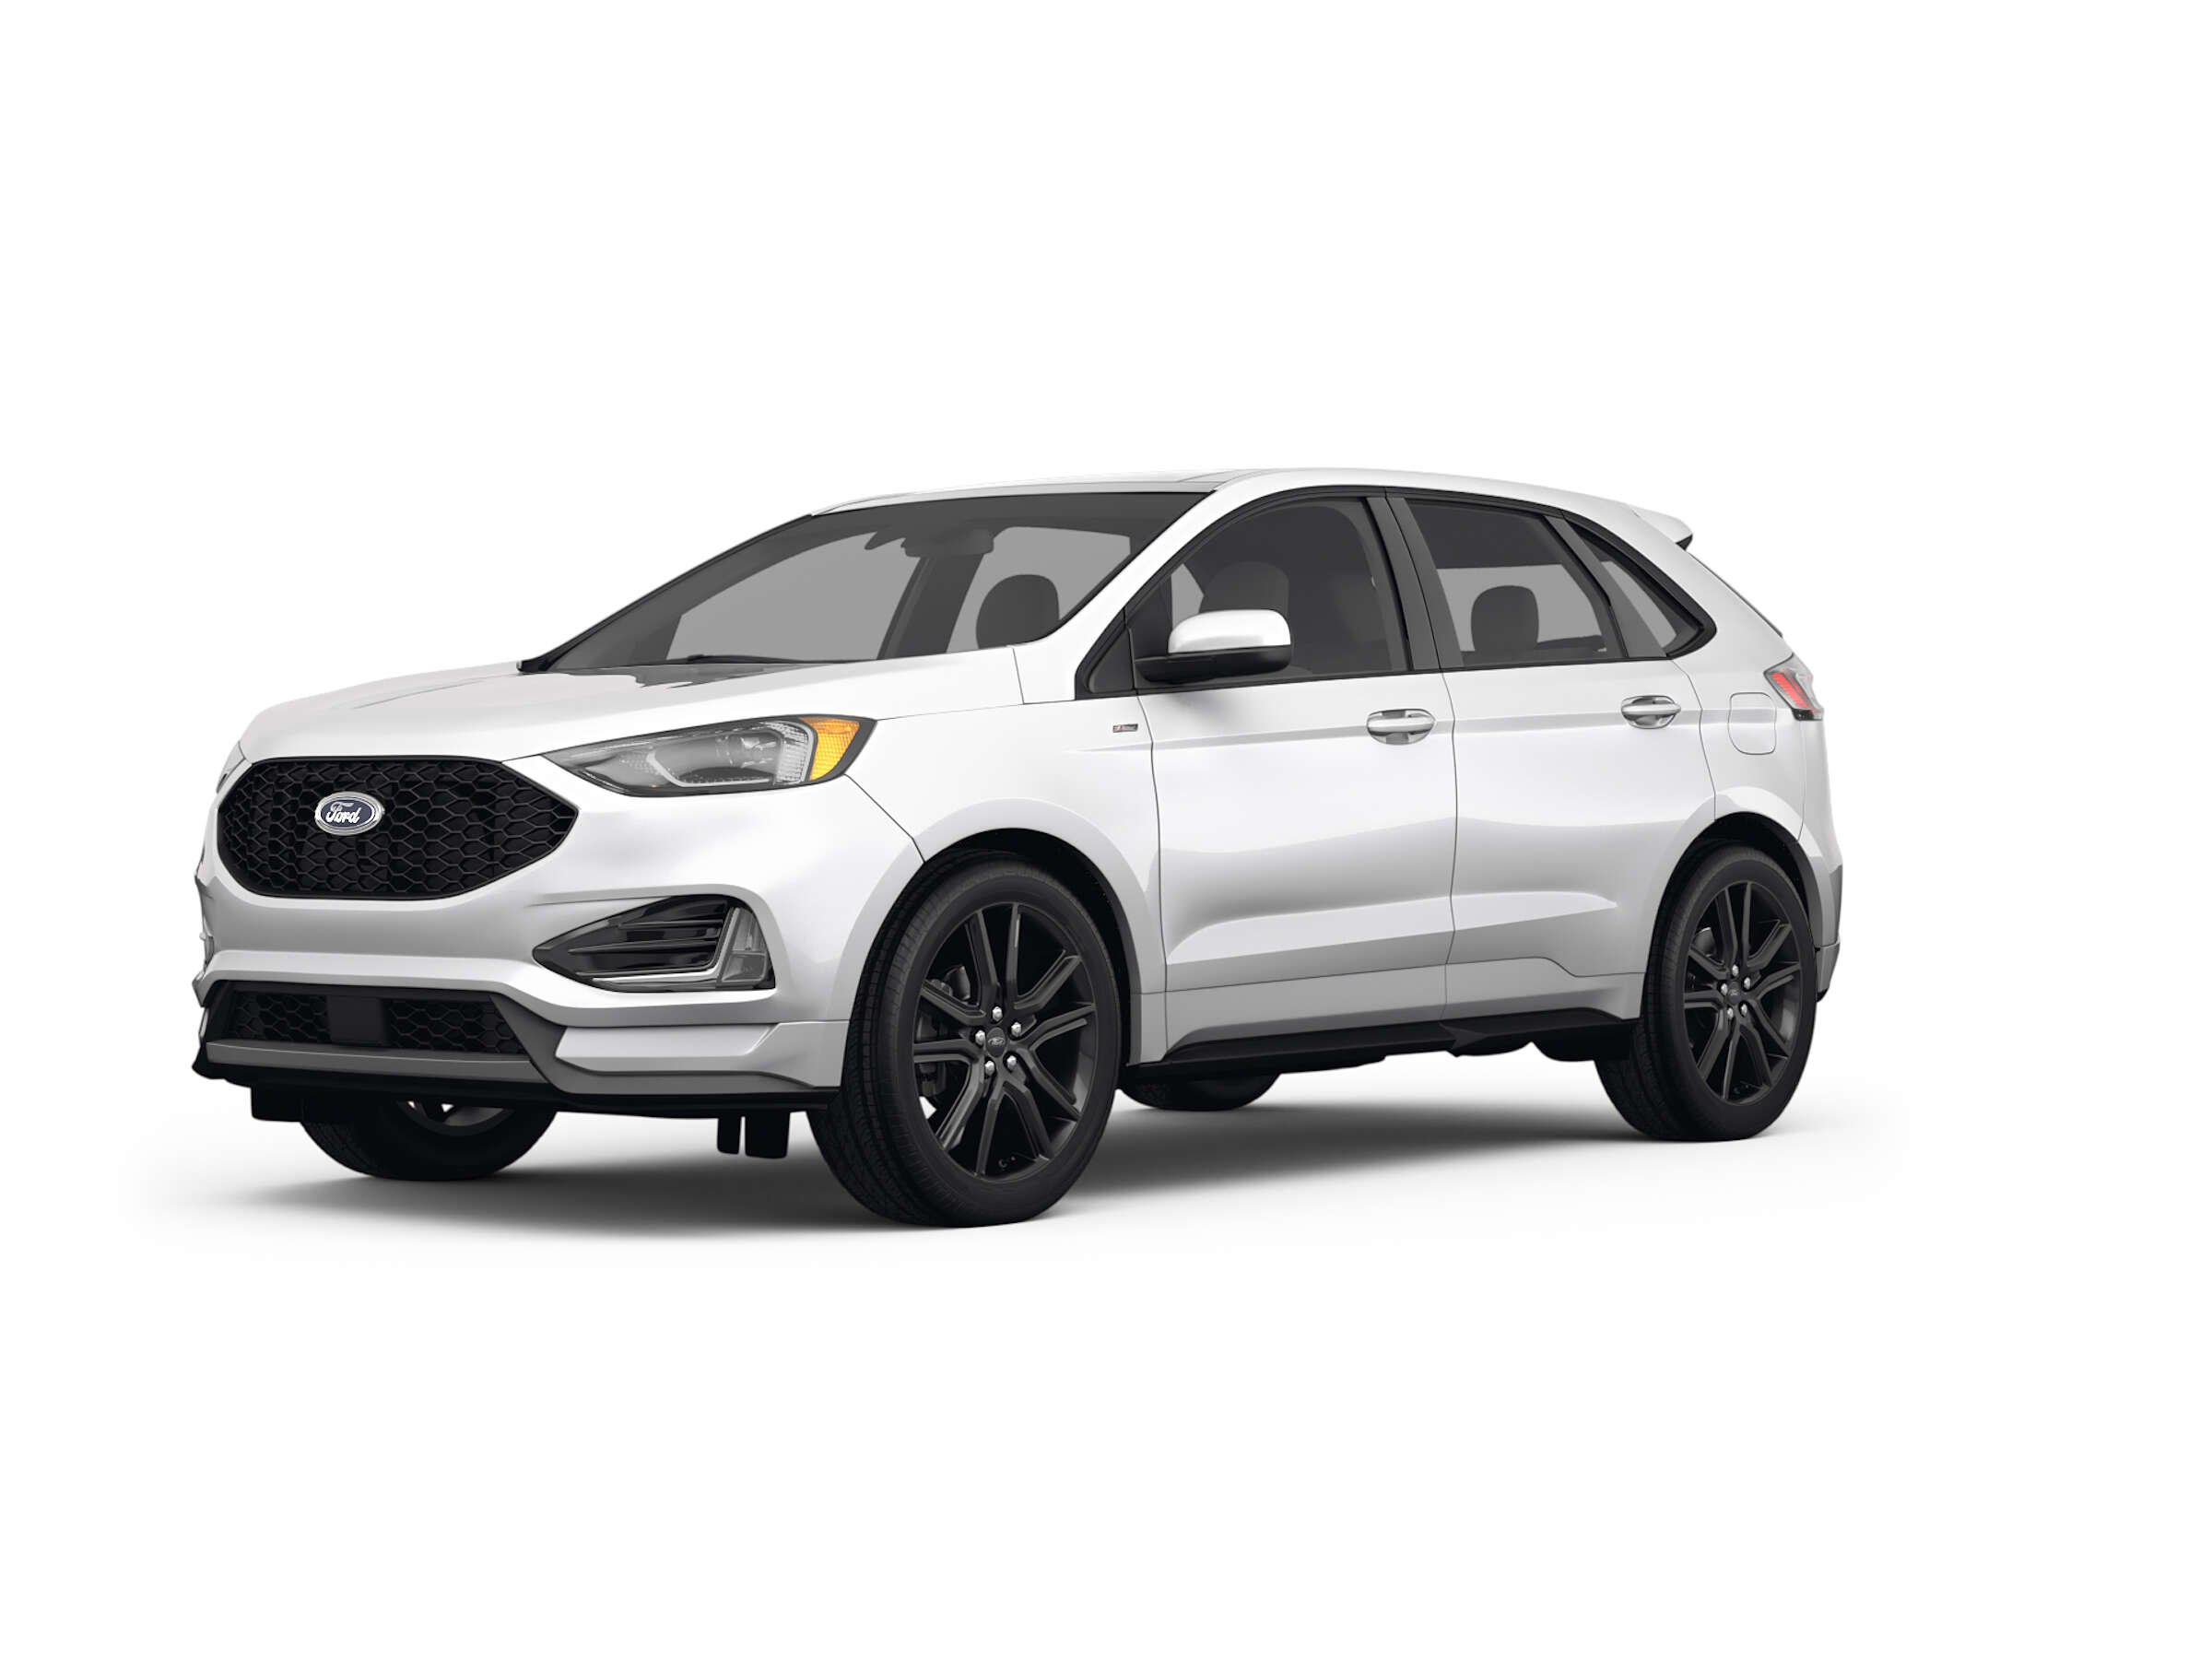 Ford Edge for sale in Knoxville, TN